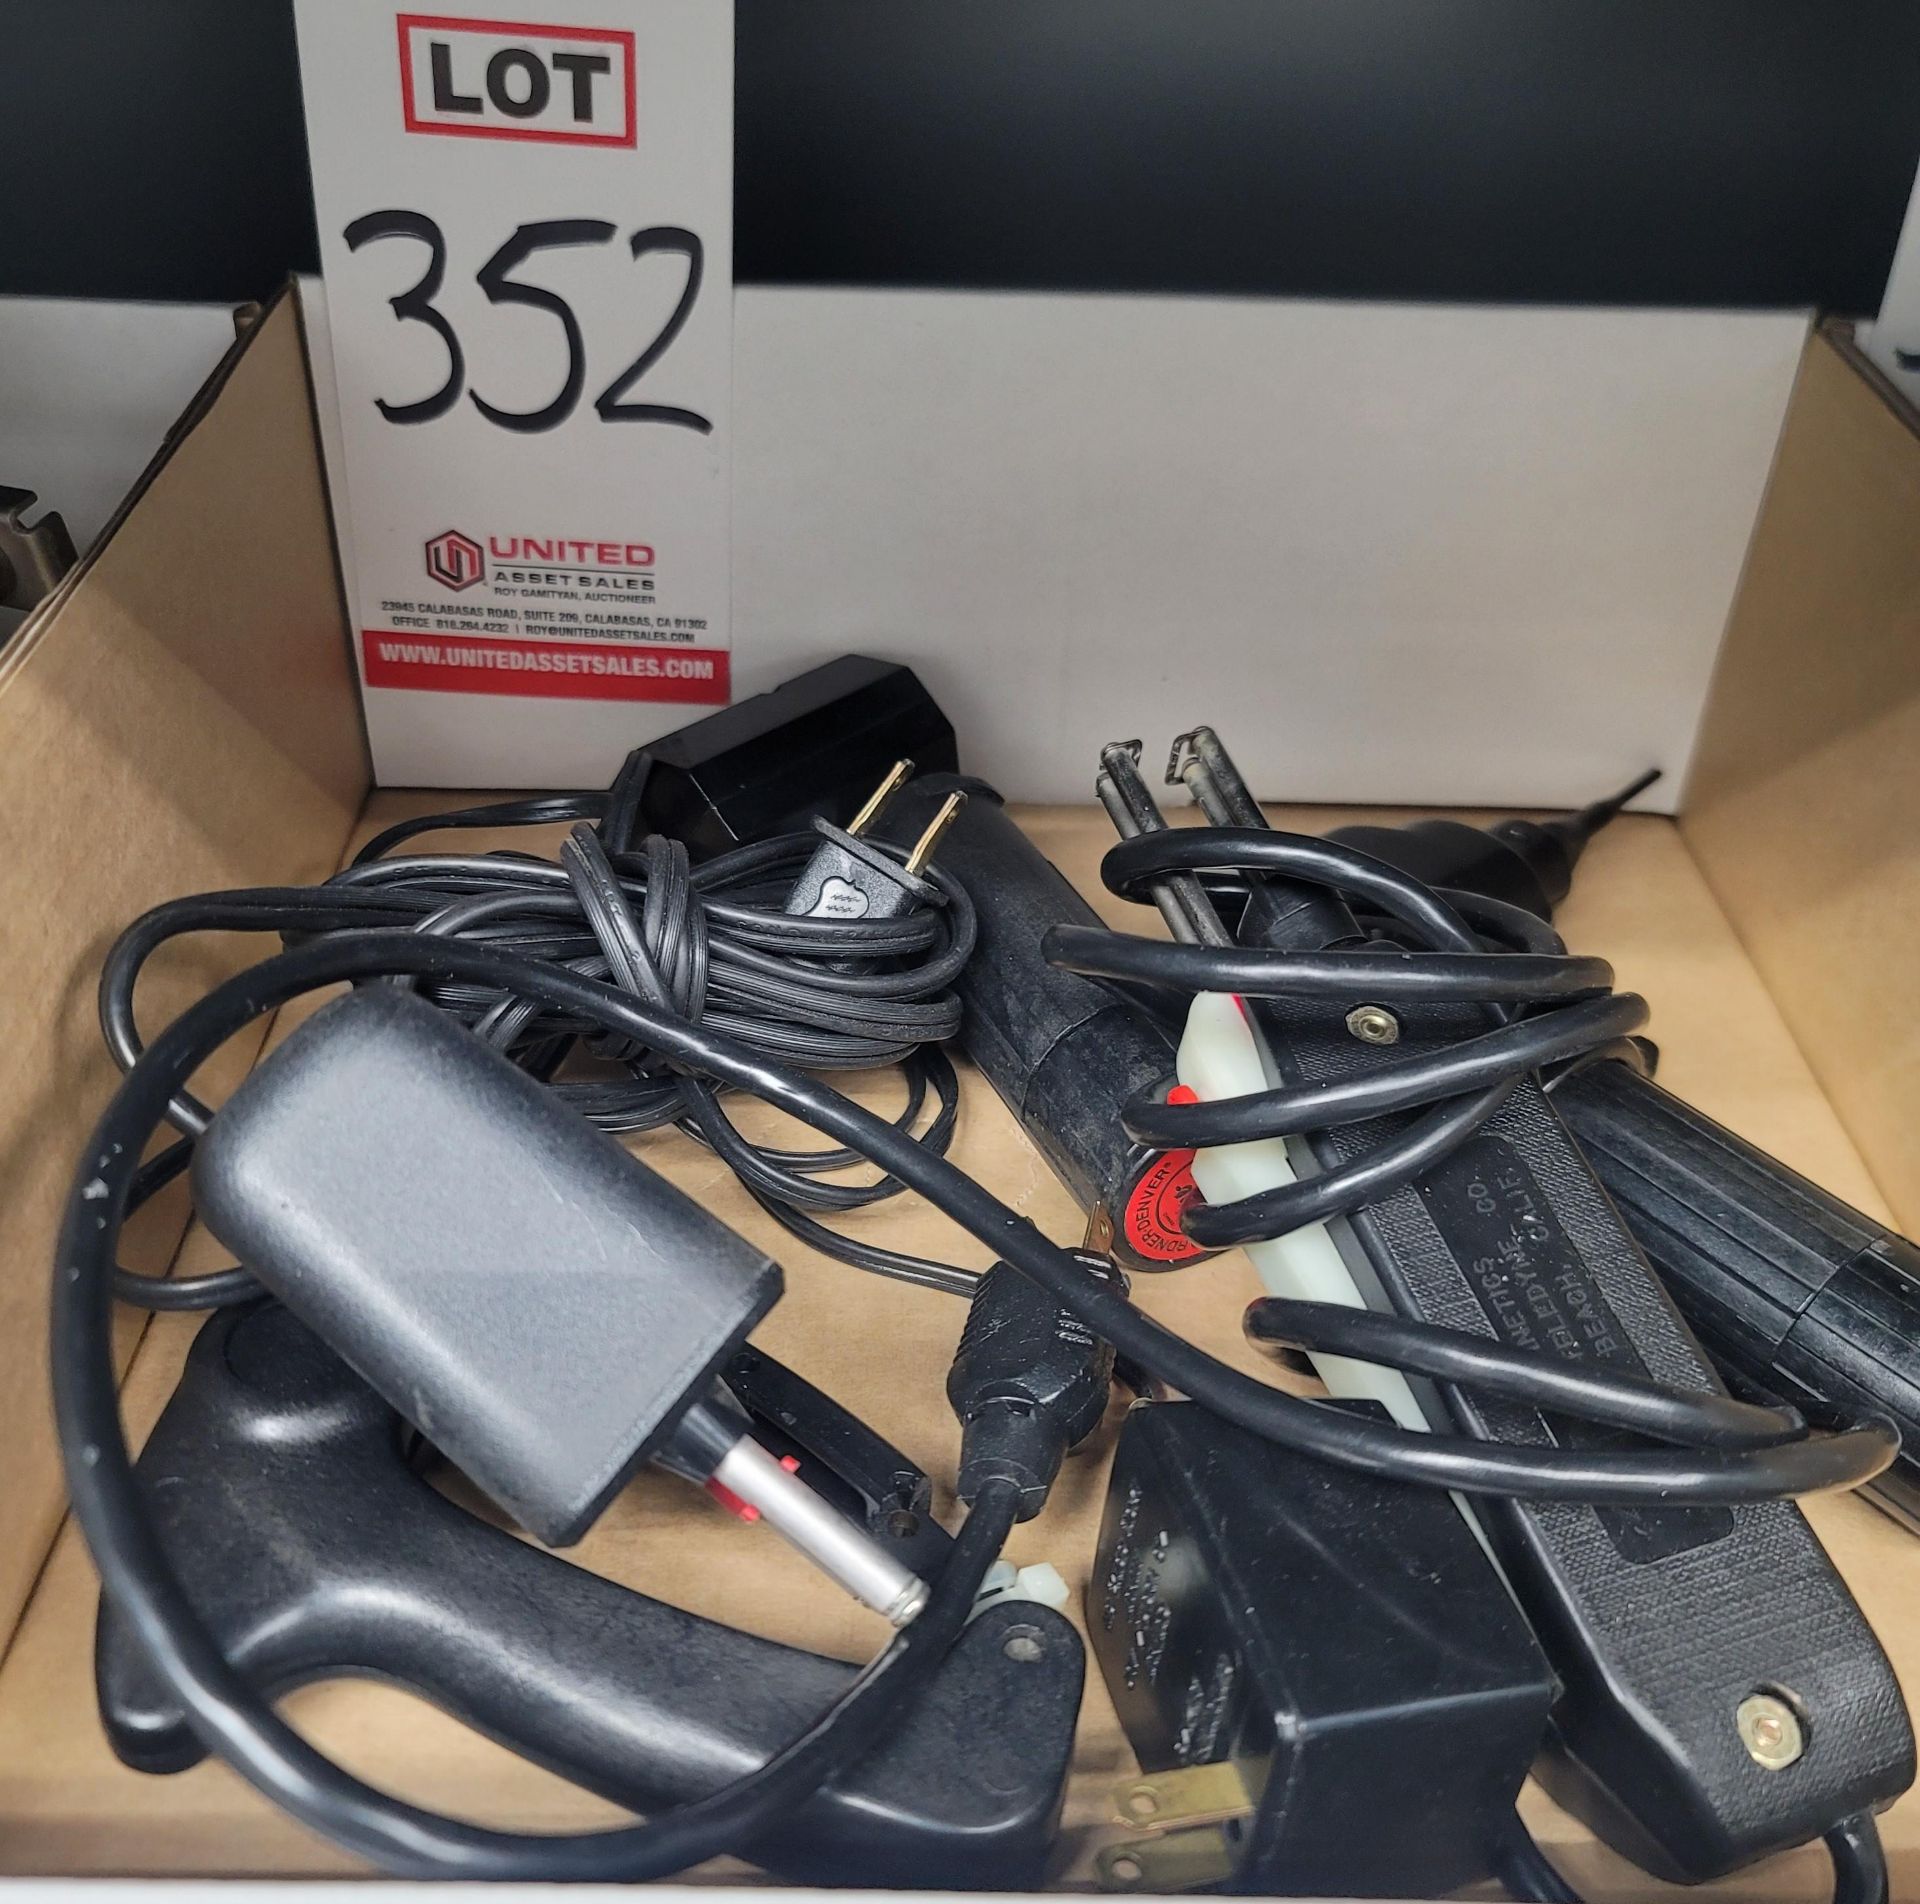 LOT - STRIPALL THERMAL WIRE STRIPPERS, ETC.